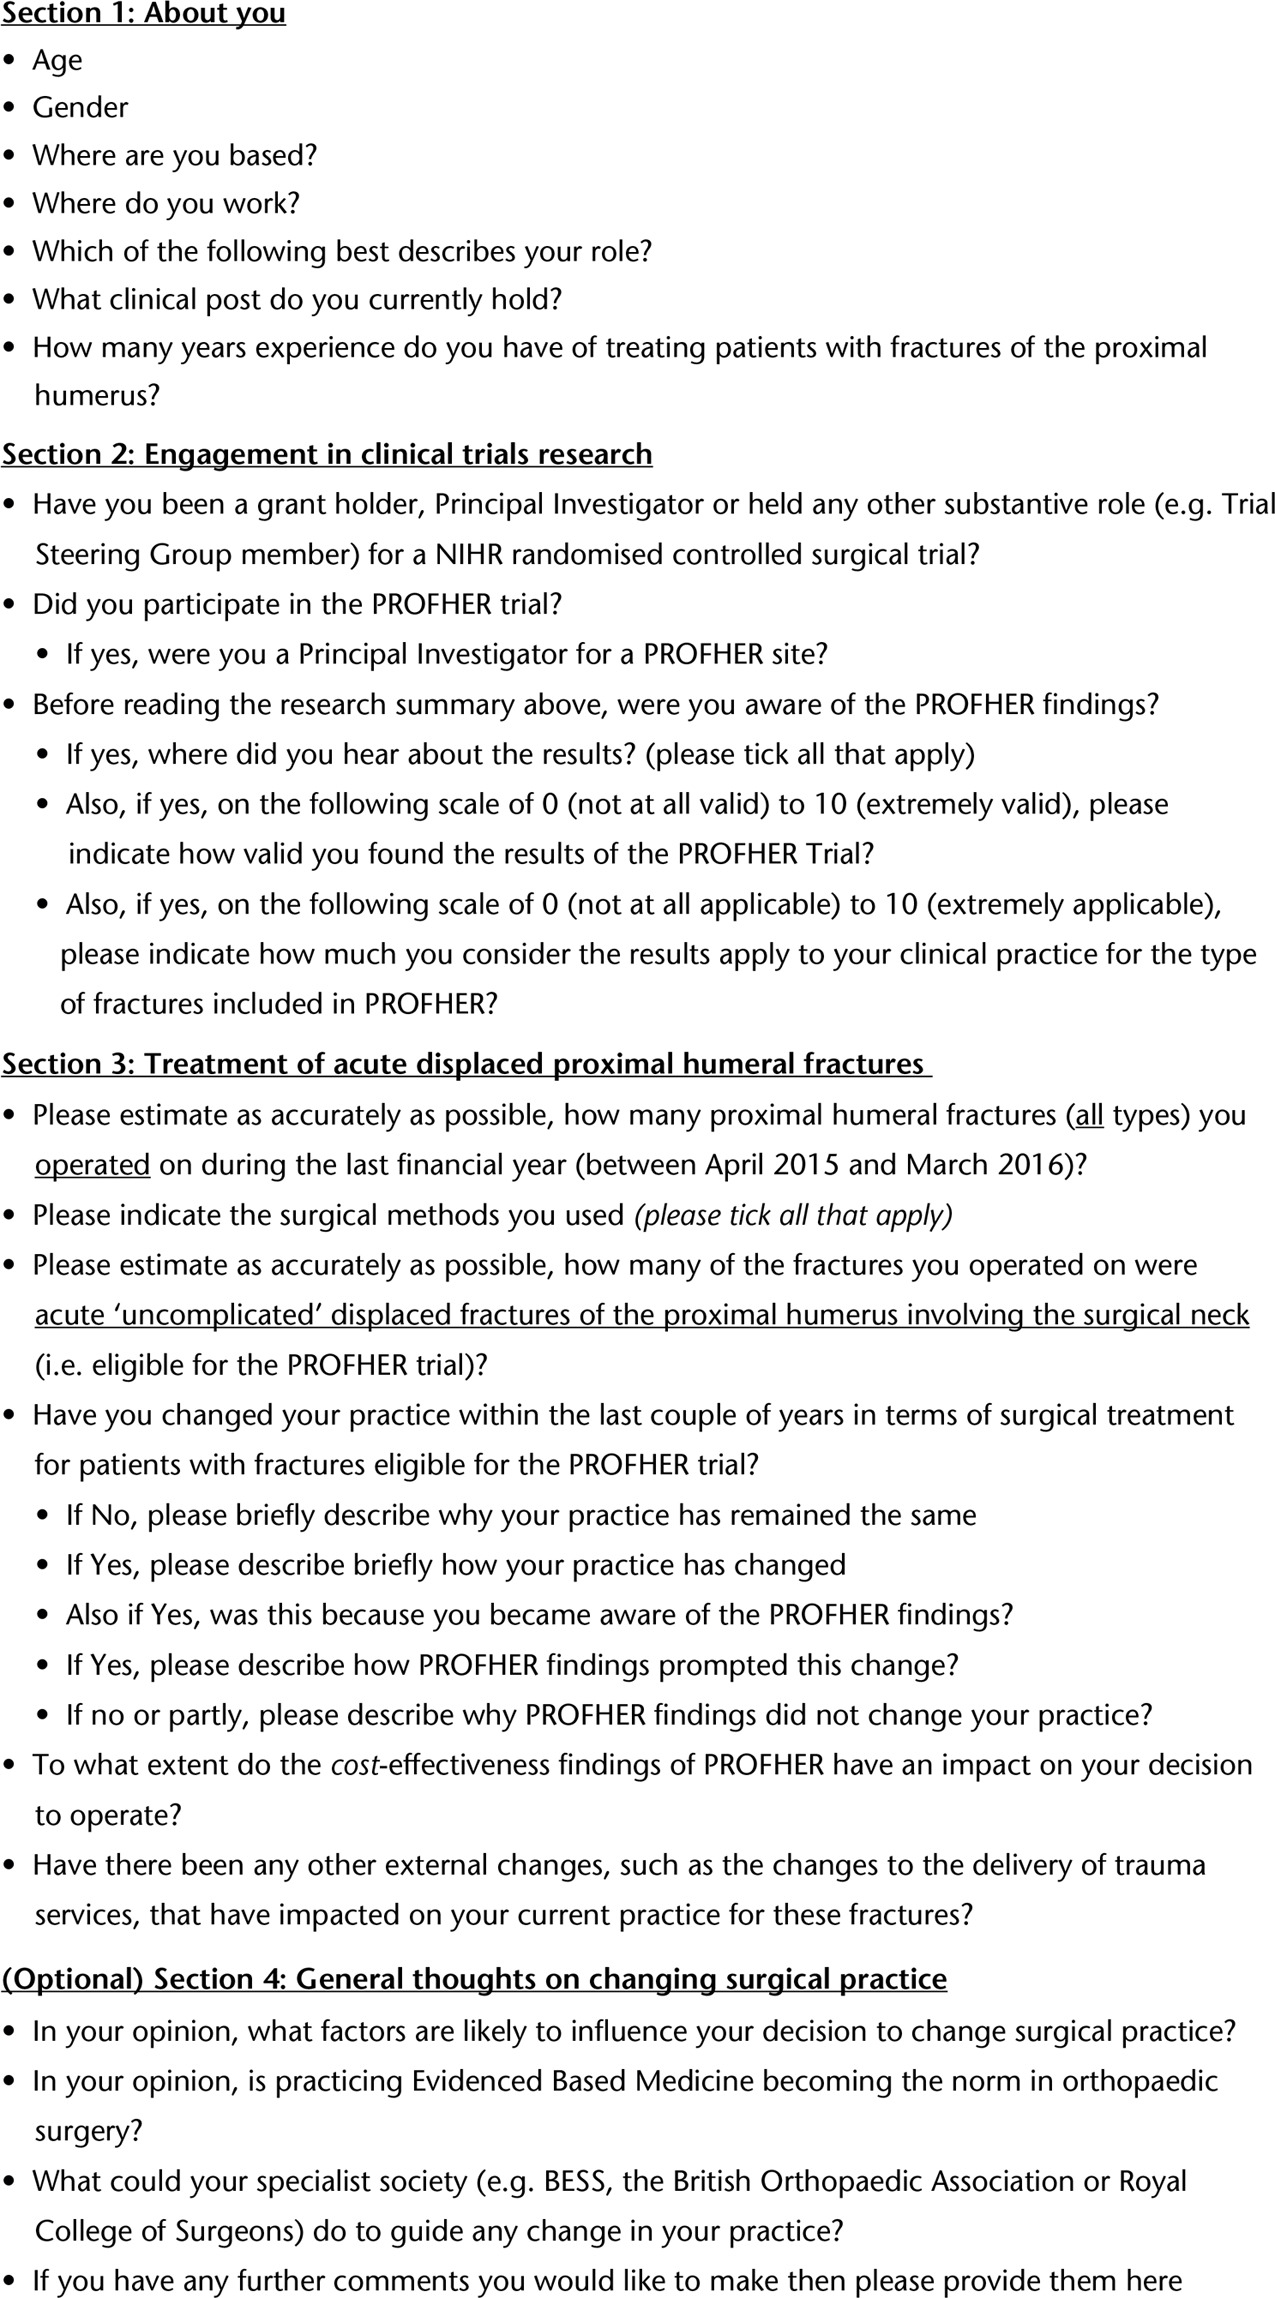 Fig. 2 
            Questionnaire items for this study (NIHR, National Institute for Health Research; PROFHER, Proximal Fracture of the Humerus: Evaluation by Randomisation; BESS, British Elbow and Shoulder Society).
          